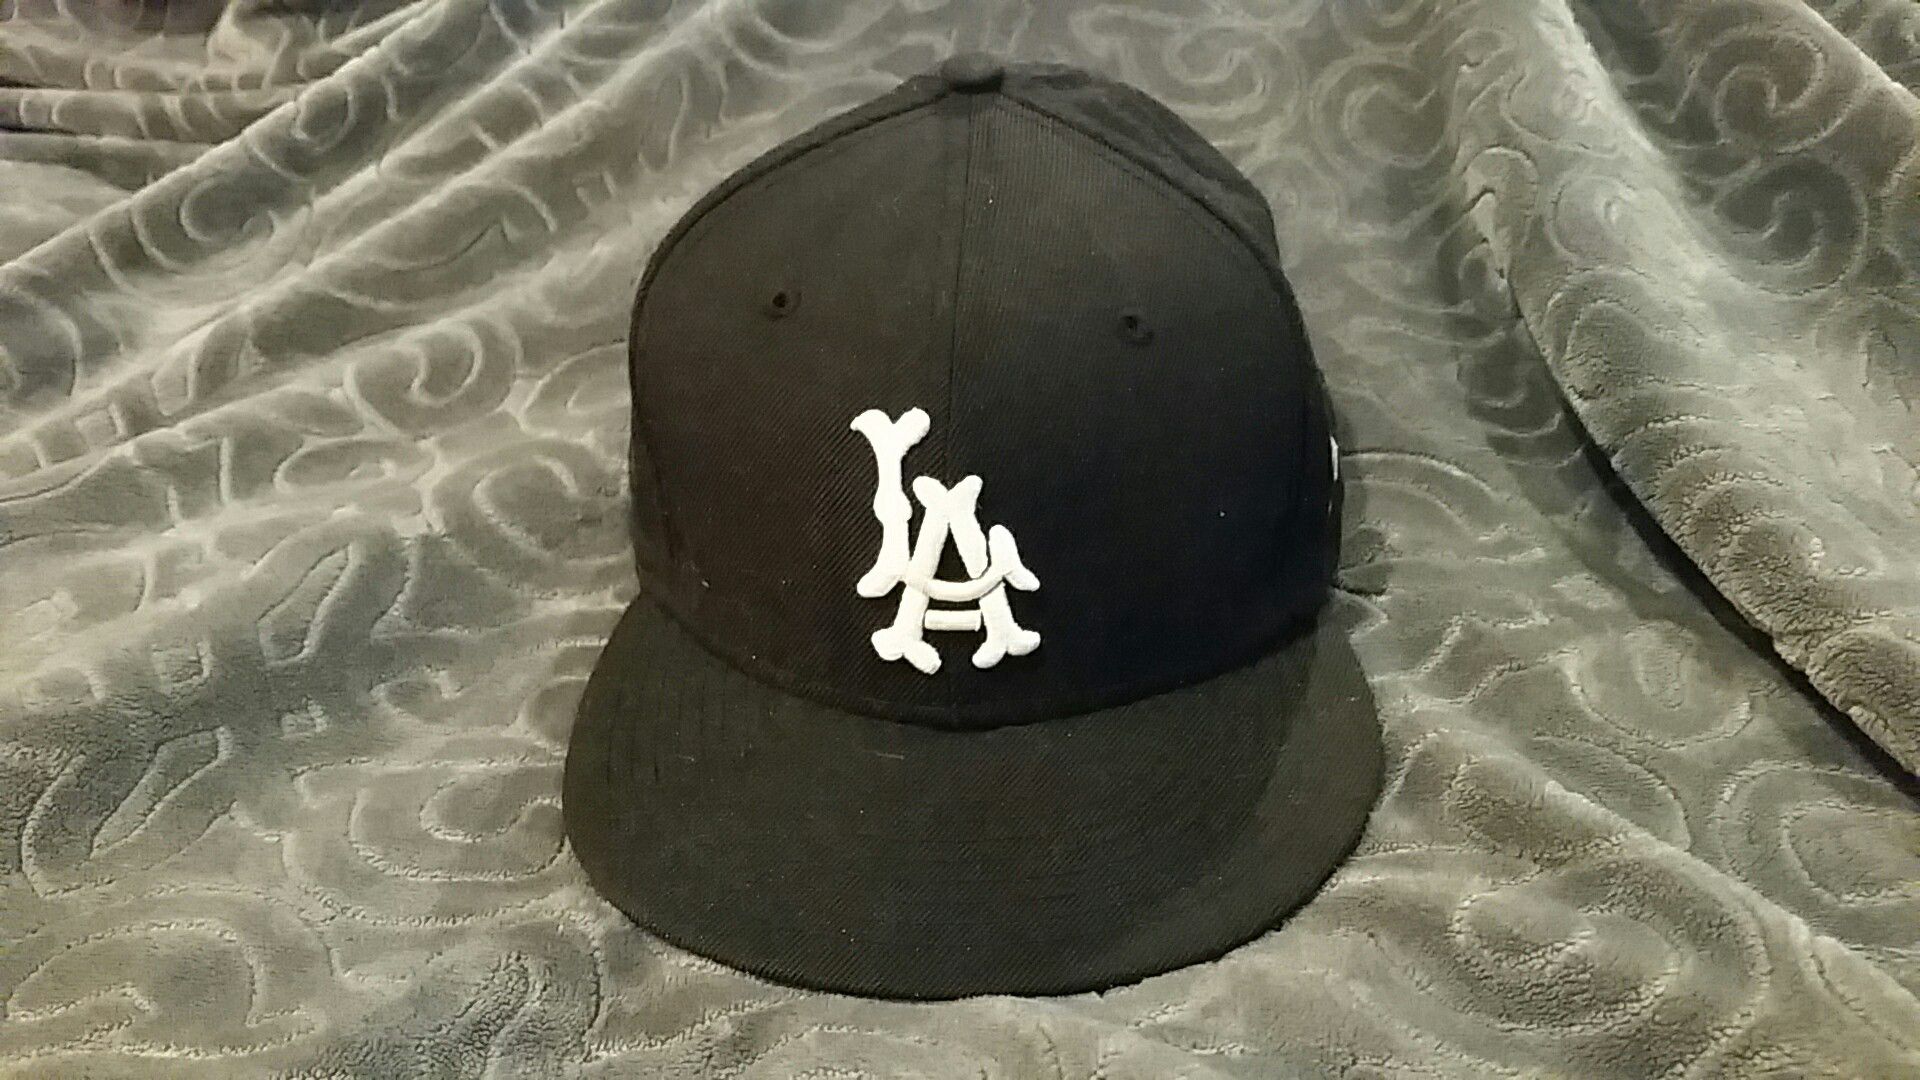 L.A. DODGERS NEW ERA 59FIFTY FITTED BASEBALL HAT 7 3/4